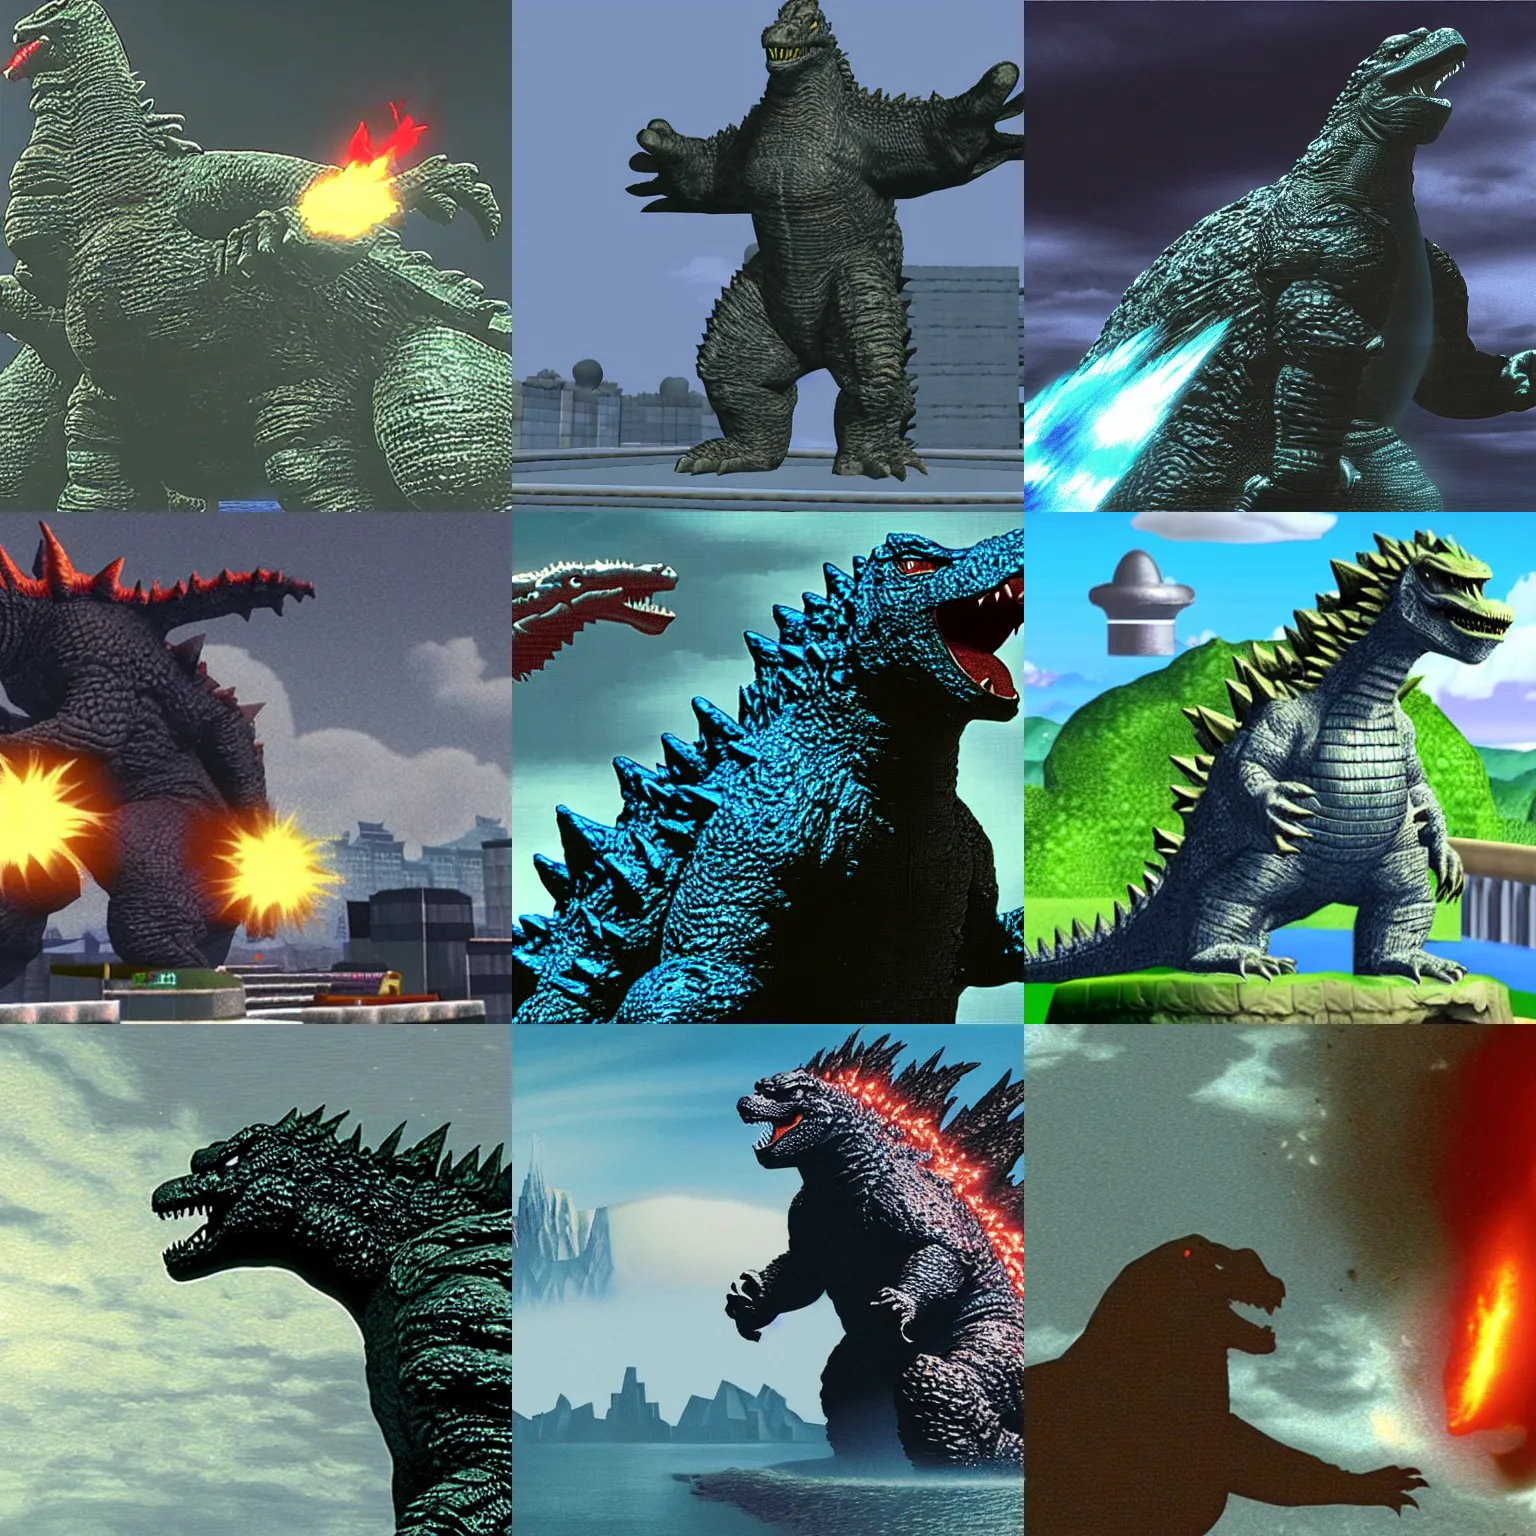 Prompt: screenshot of godzilla from the video game Super Mario 64